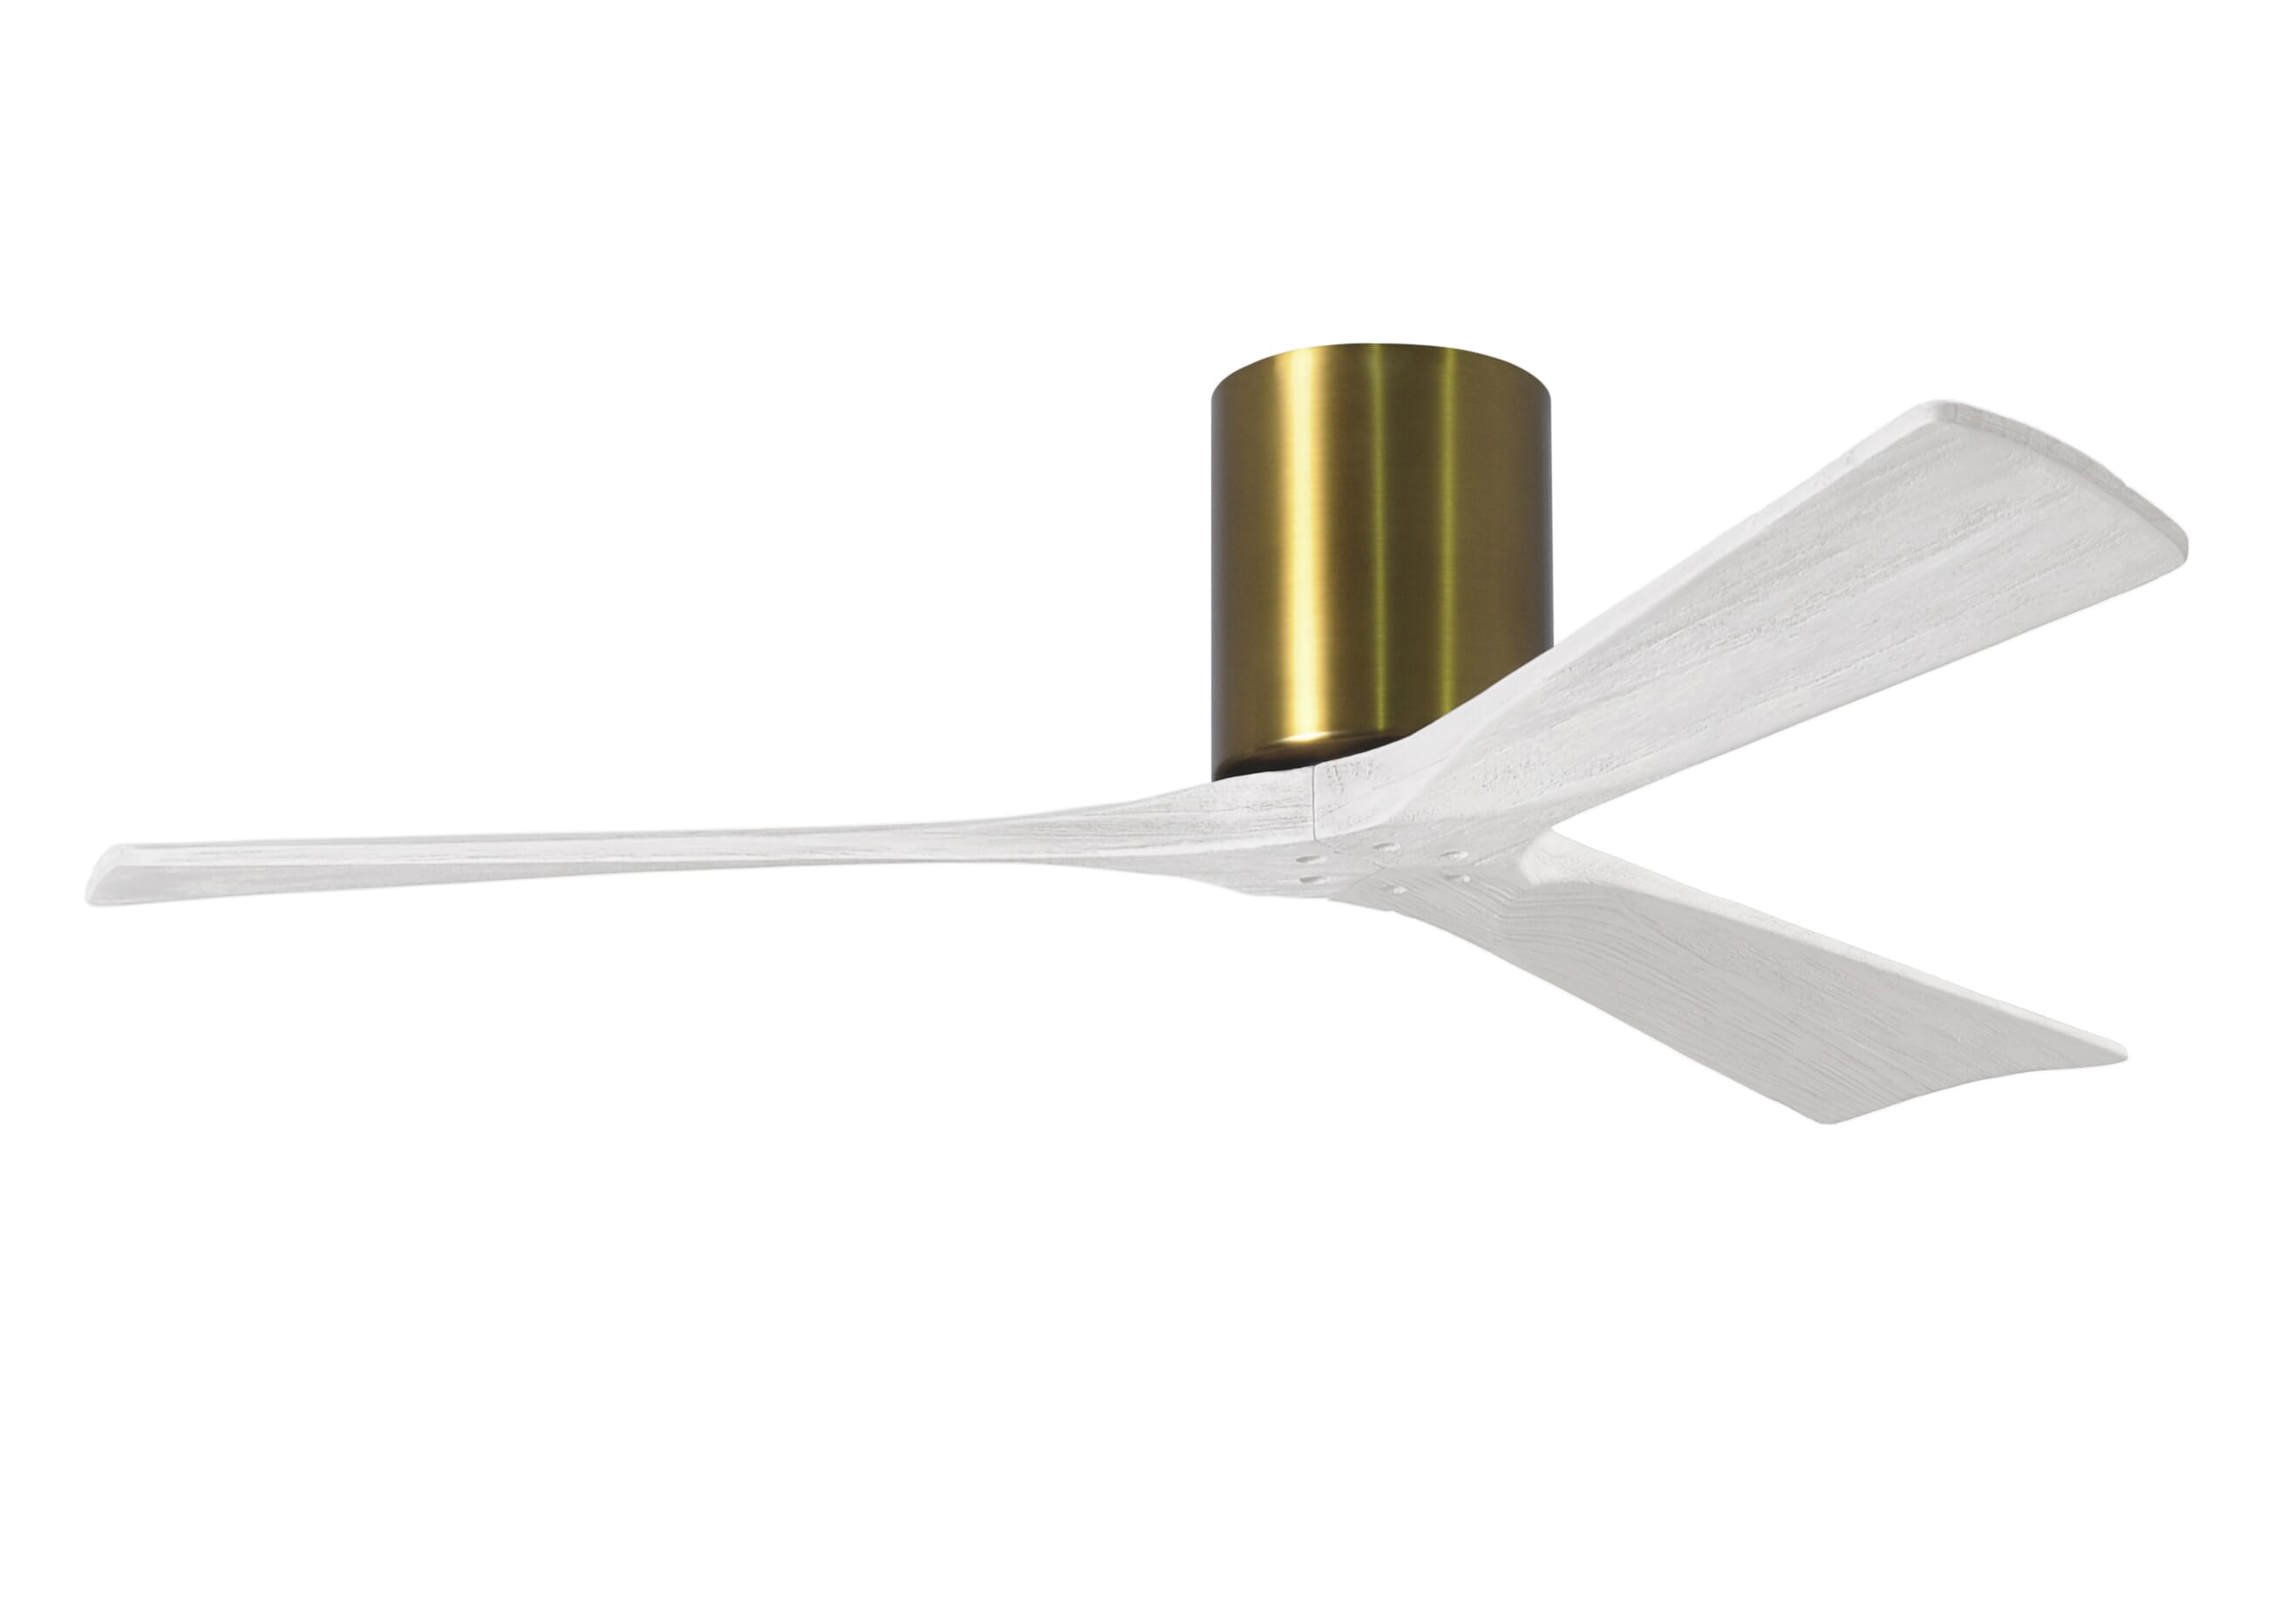 Irene 6-Speed DC 52"" Ceiling Fan in Brushed Brass with Matte White blades -  Matthews Fan Company, IR3H-BRBR-MWH-52